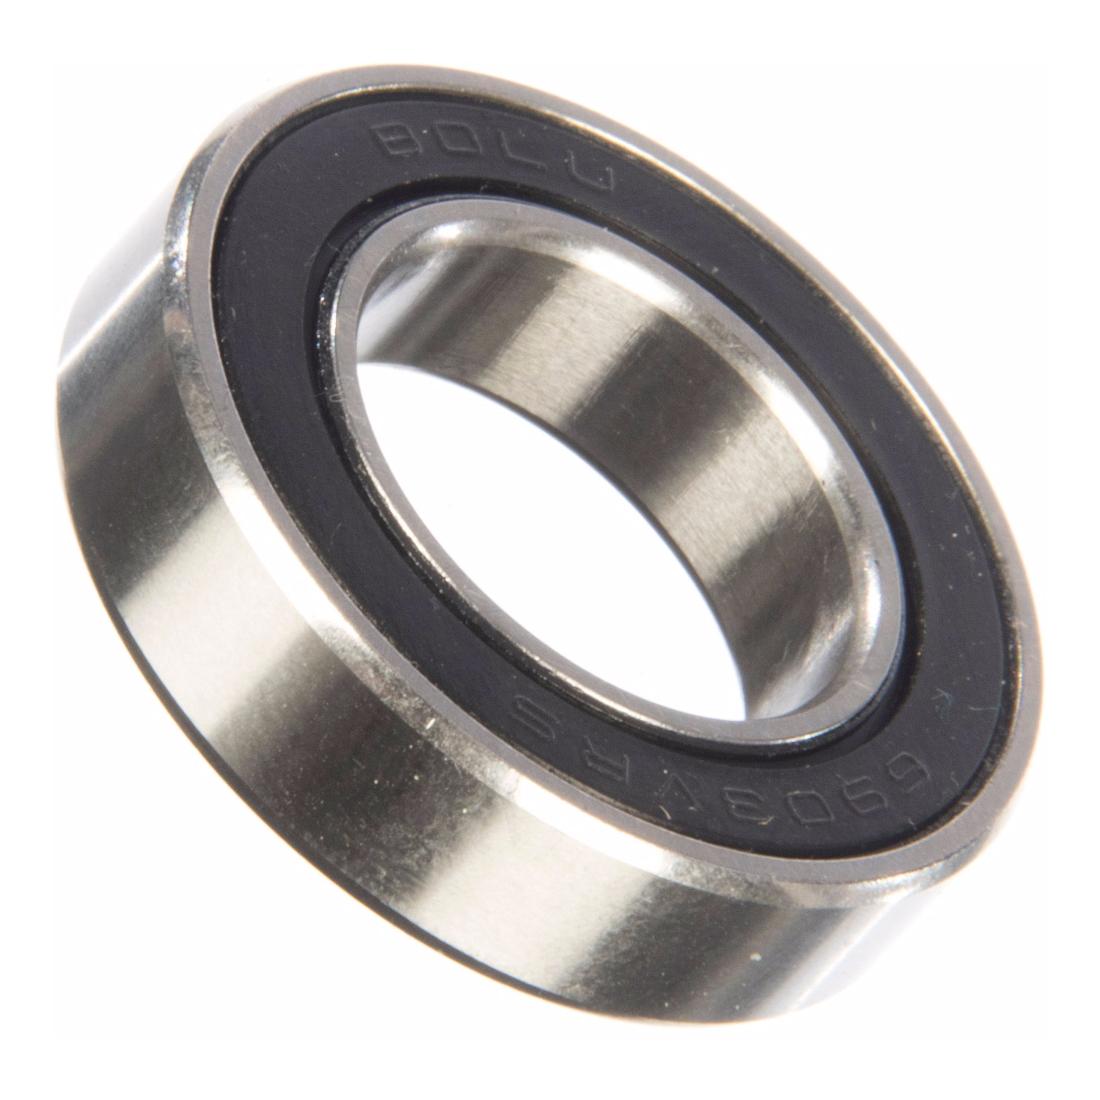 Brand-x Plus Sealed Bearing - 6903 (v2rs)  Silver